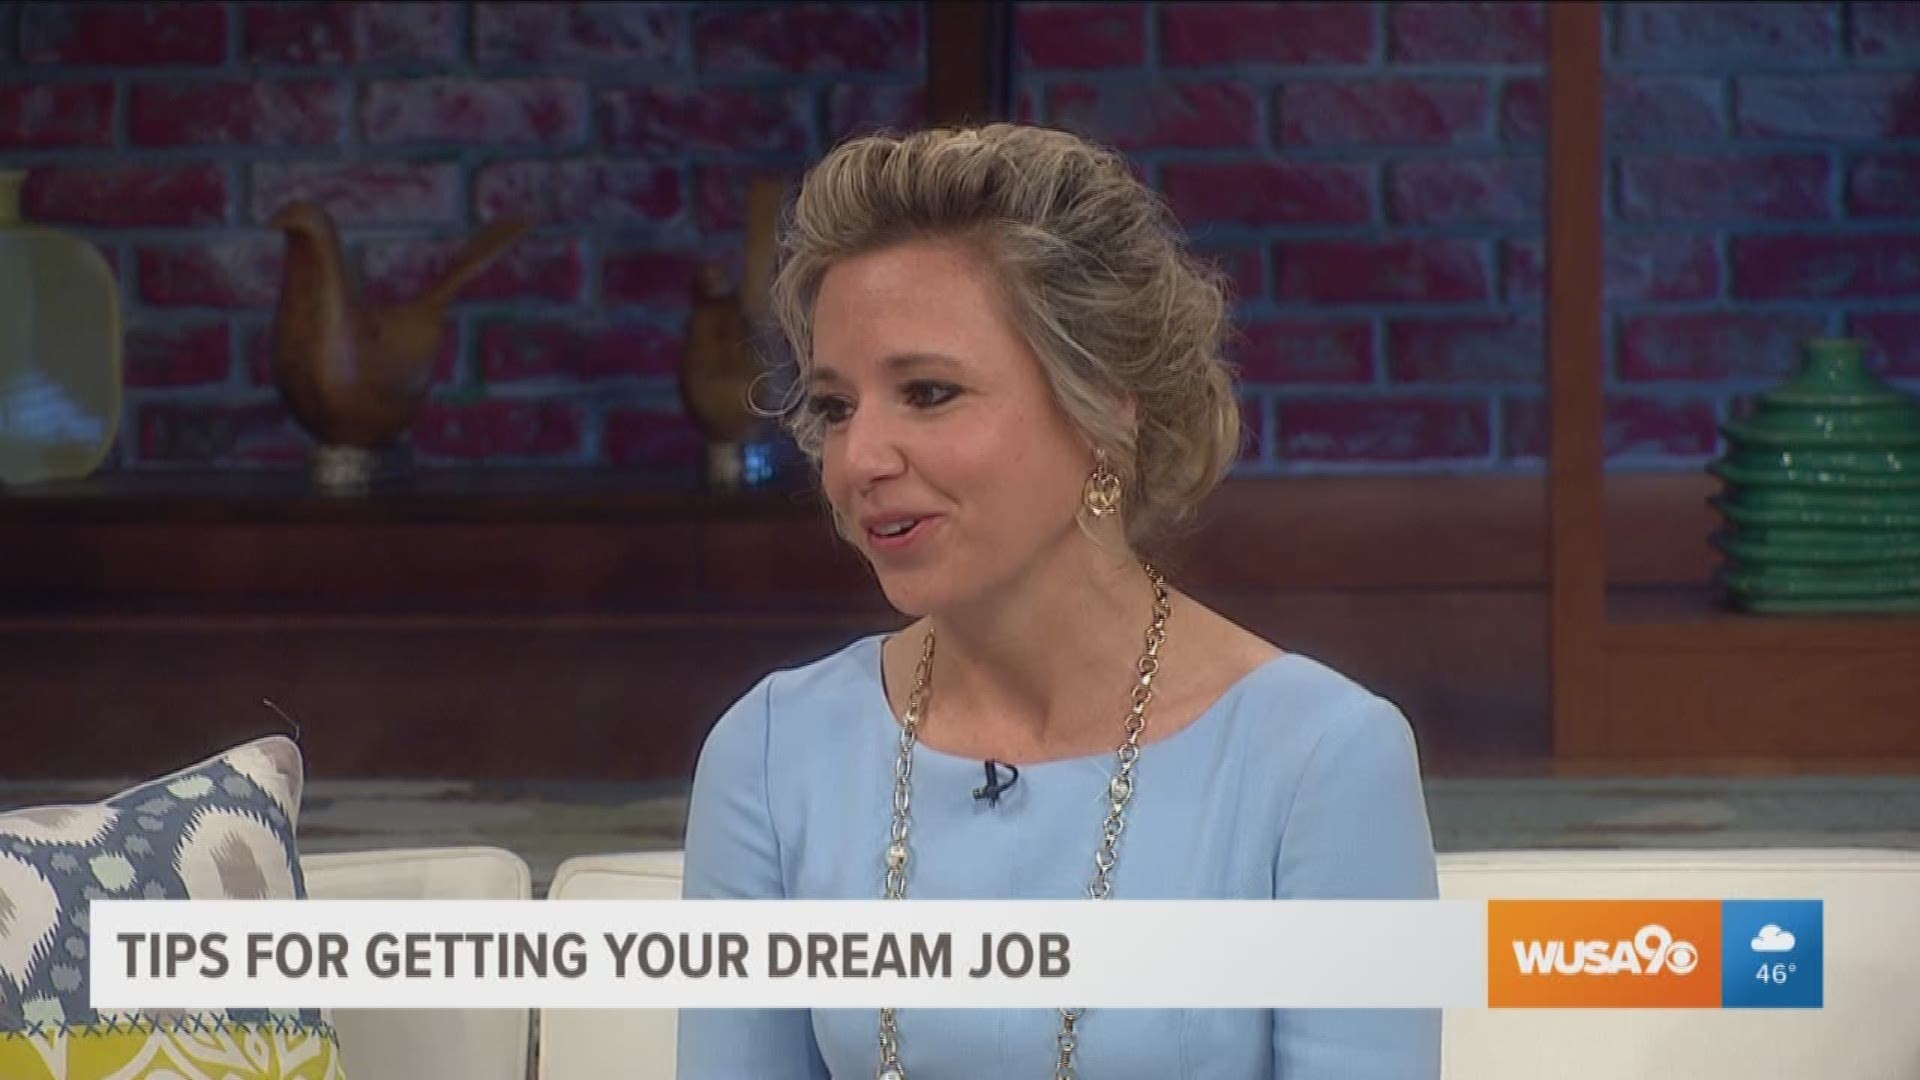 Jackie Ducci, CEO/founder of Ducci & Associates and author of Amazon #1 Best Seller, "Almost Hired", shares tips to help you stand out while applying for your dream job!